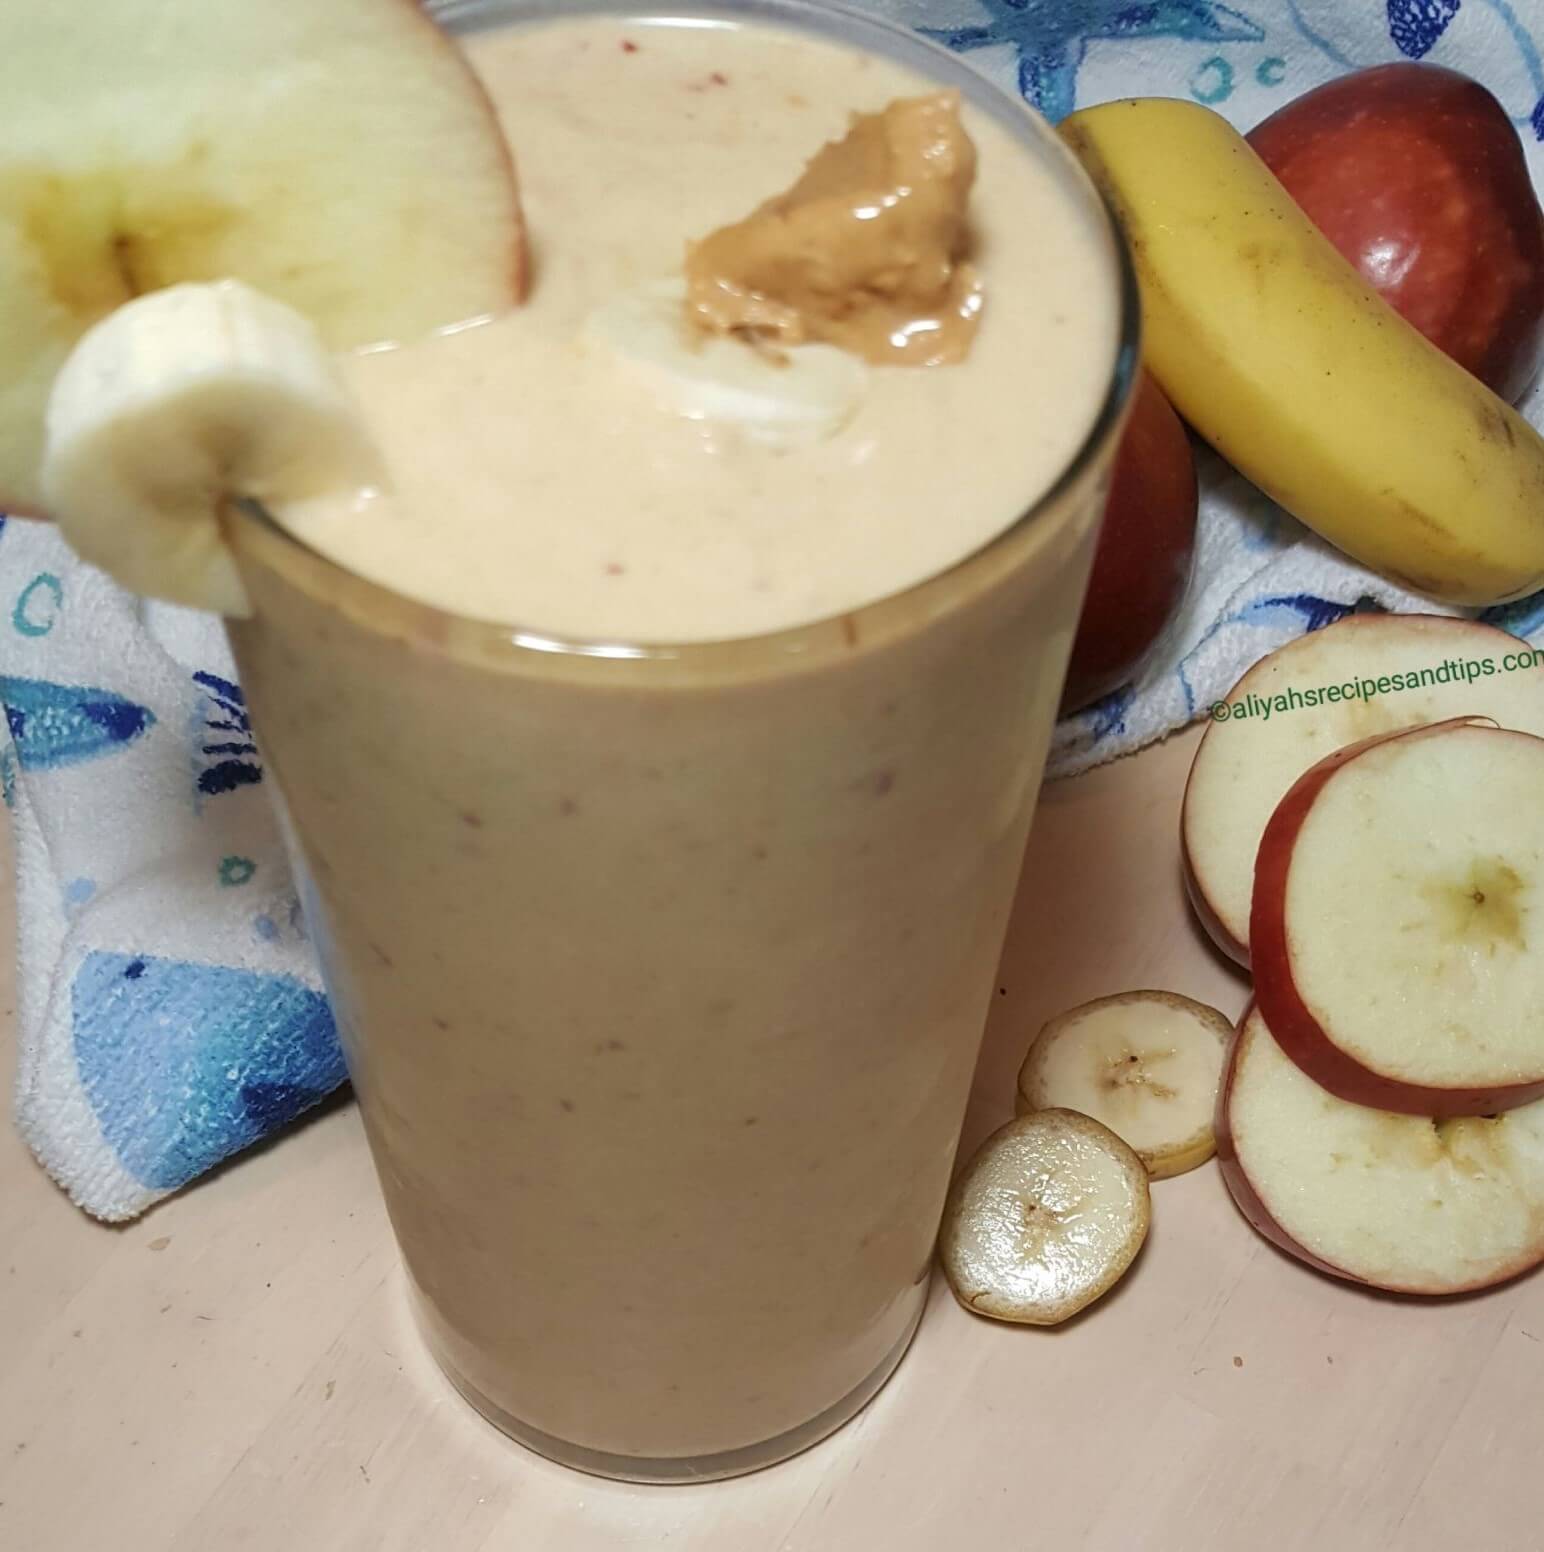 apple peanut butter and banana smoothie, peanut butter smoothie, greek yogurt, juice smoothie, healthy smoothie, banana apple peanut butter smoothie, apple peanut butter smoothie, peanut butter smoothie, apple and banana smoothie, apple banana smoothie, peanut butter smoothie, workout snack, lactation smoothie, smoothie recipe, banana oatmeal smoothie, green smoothie, chocolate peanut butter